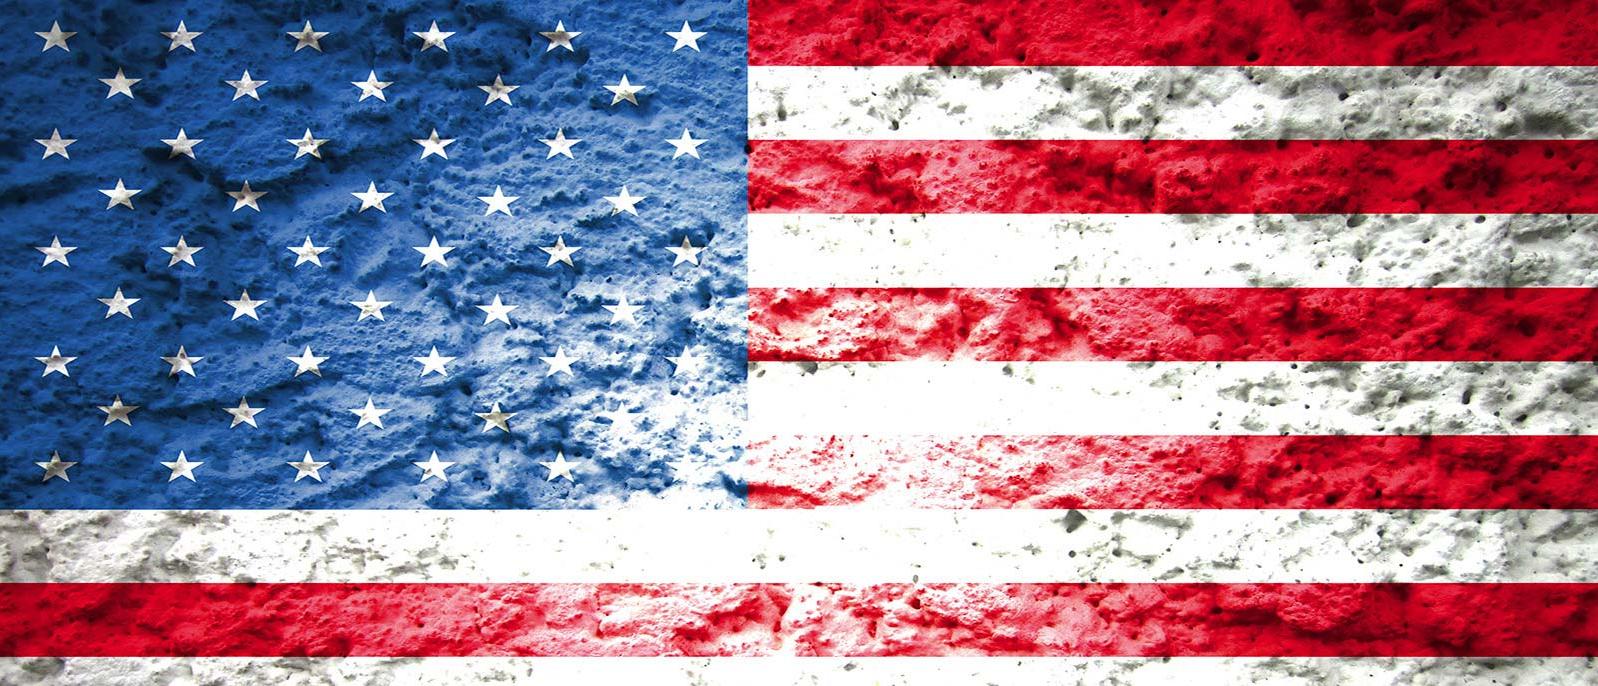 Background Image | American Flag with Texture